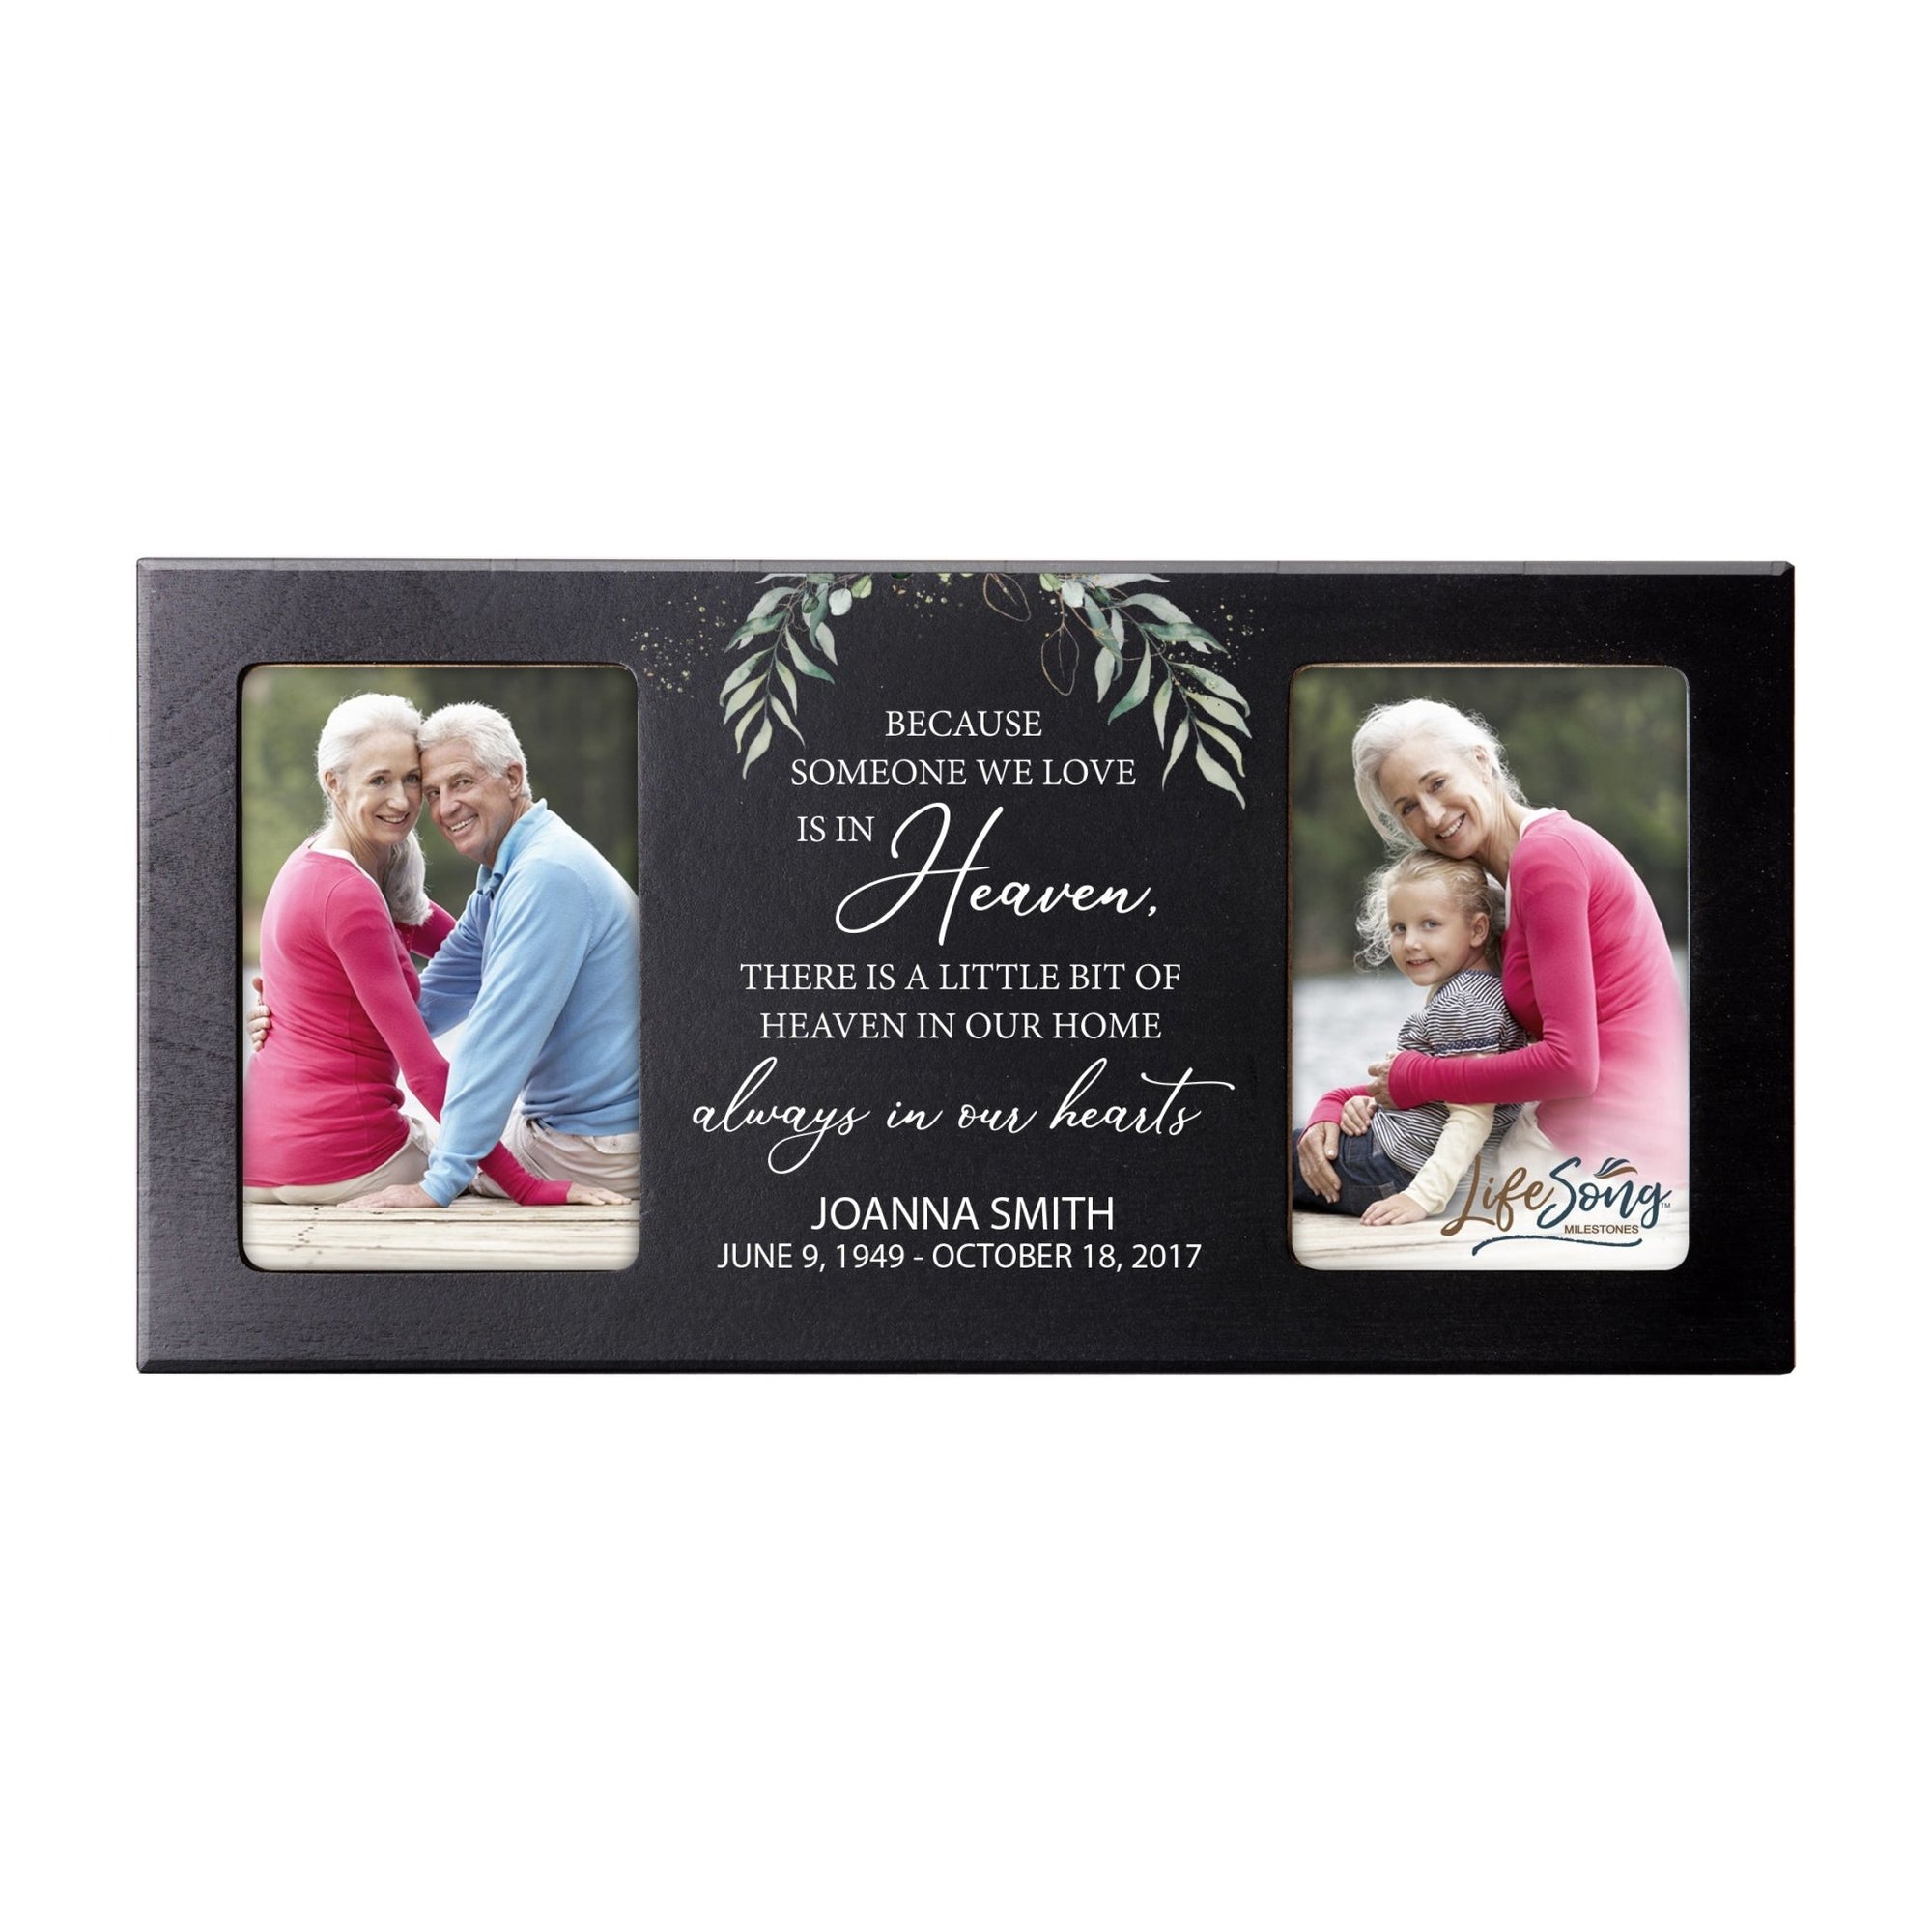 Custom Memorial Picture Frame 16x8in Holds Two 4x6in Photos - Always In Our Home - LifeSong Milestones